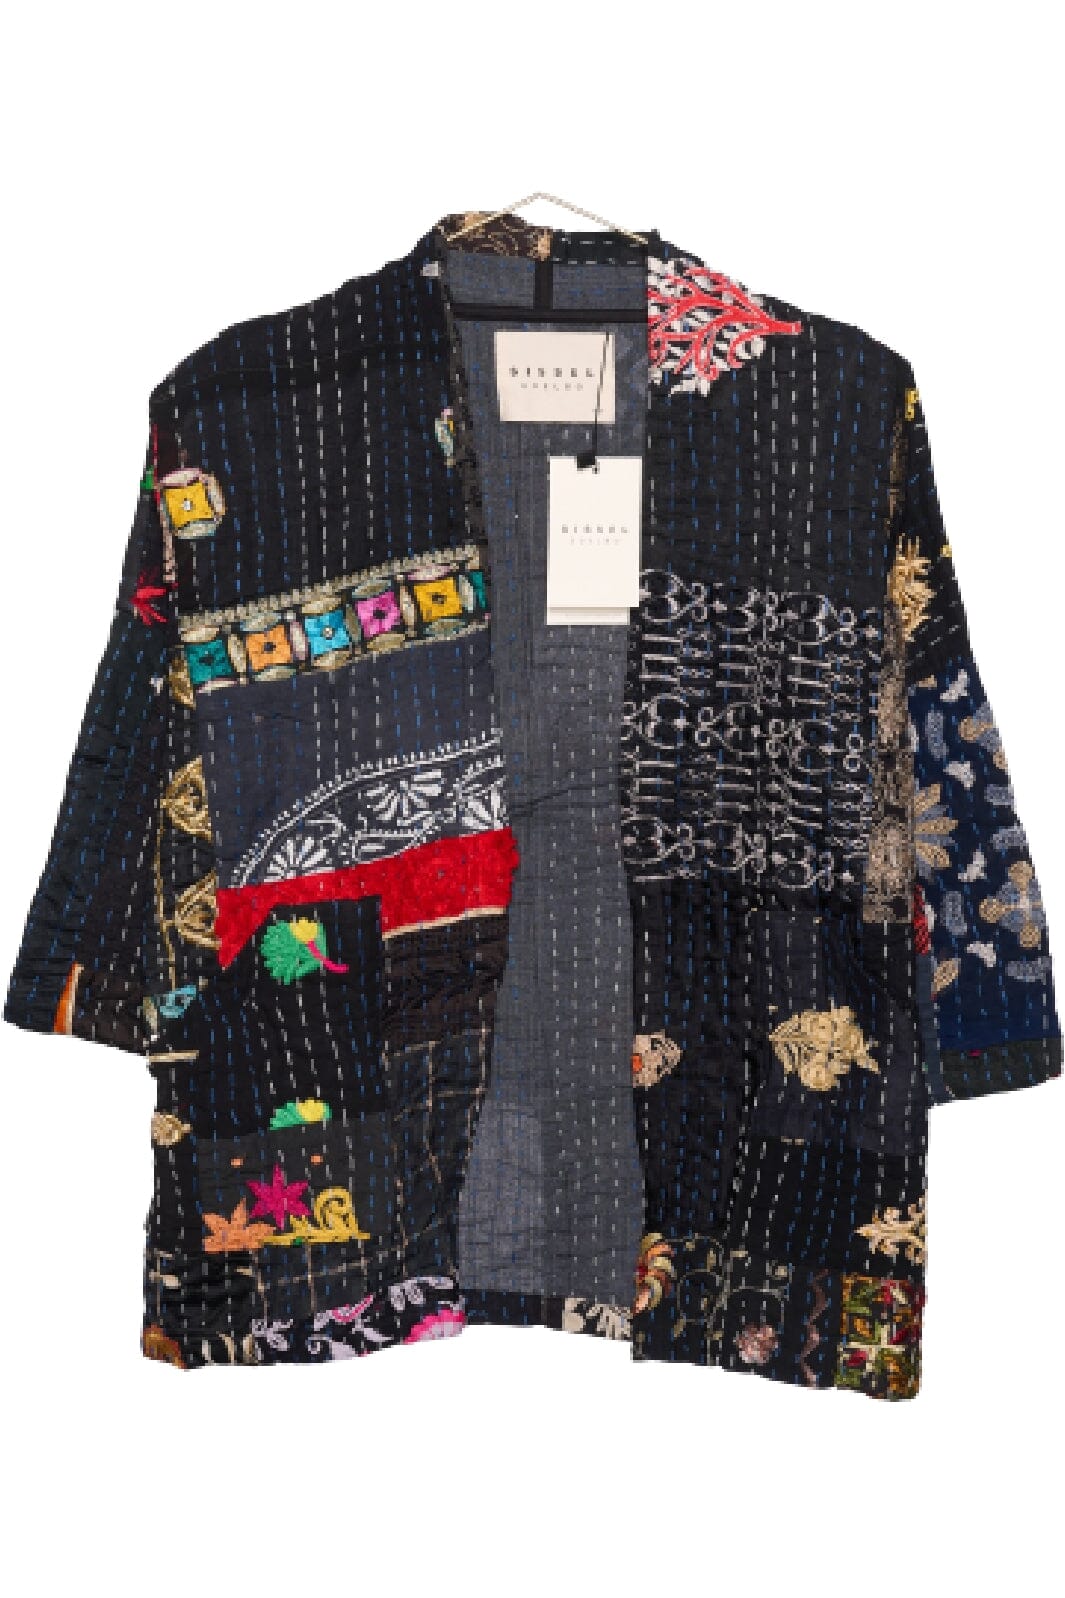 Sissel Edelbo - Tallulah Embroidery Patchwork Jacket,Tallulah Embroidery Patchwork Jacket - No. 407 Jakker 